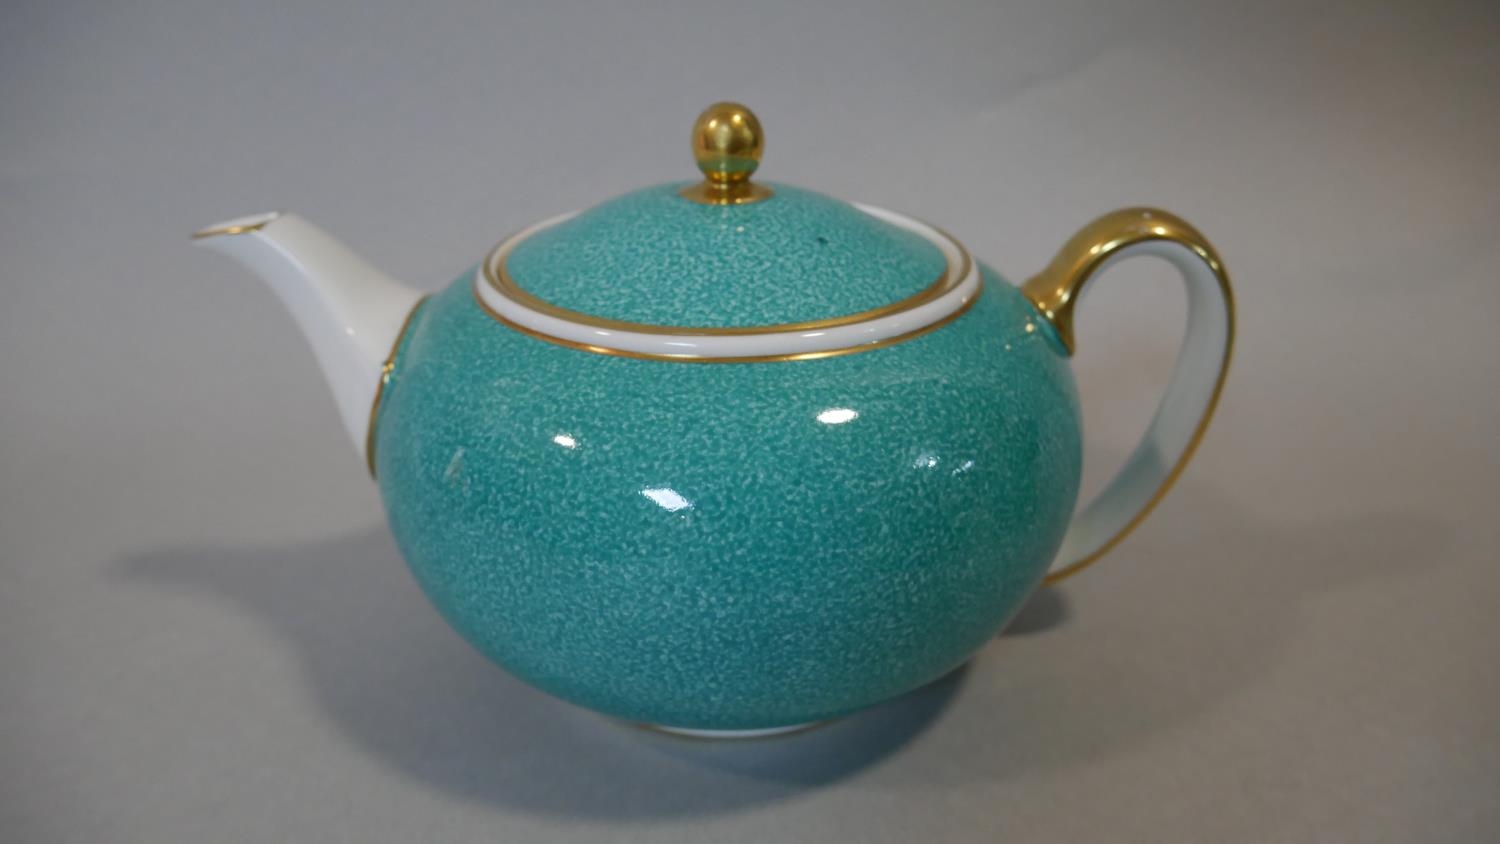 A part six person Wedgwood tea service. The set has a dappled turquoise and gilt design. Makers - Image 3 of 6